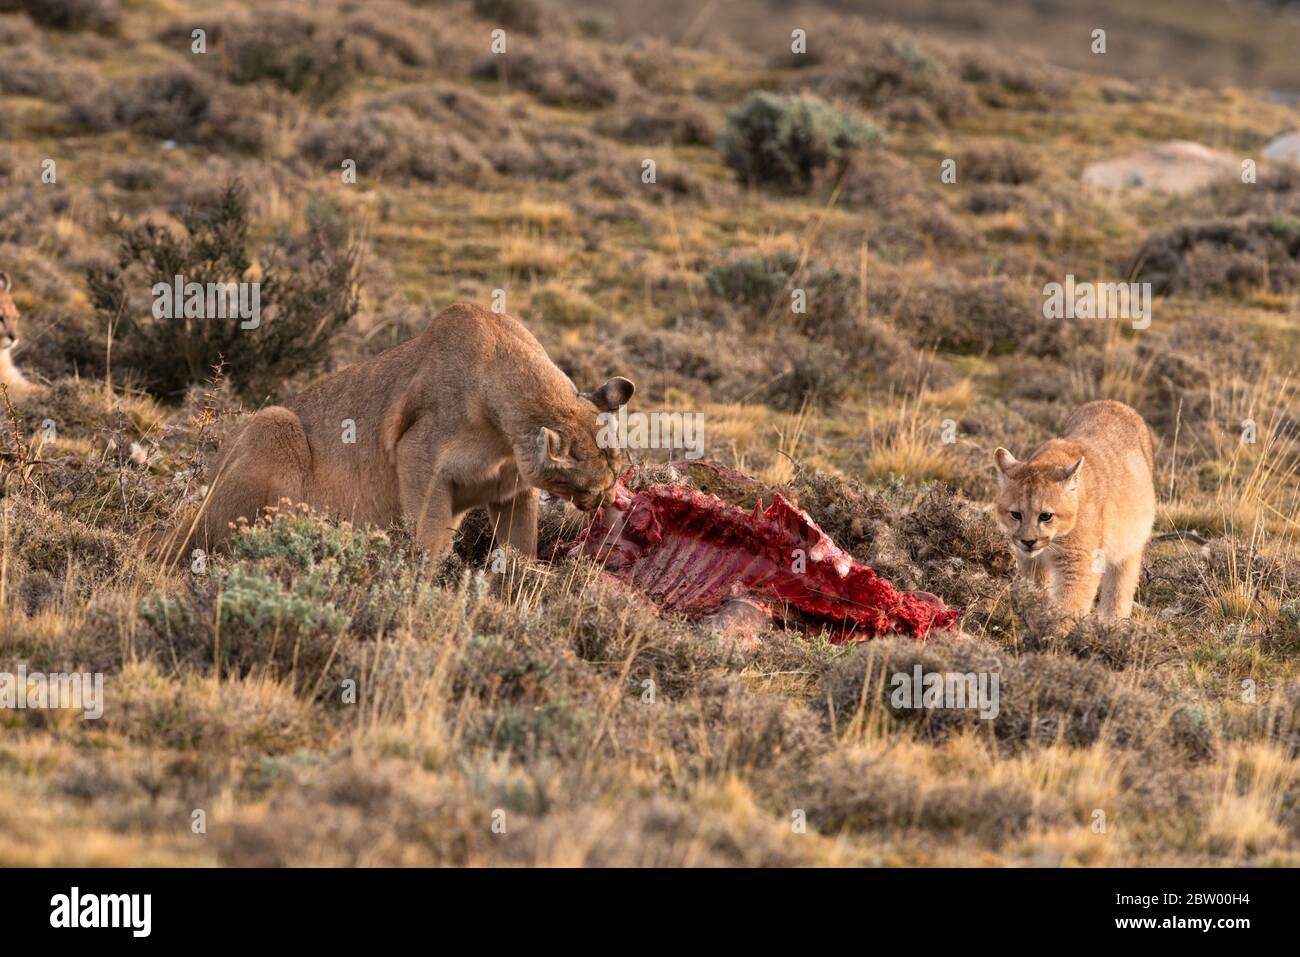 A Puma (Puma concolor) and its cub eating a Guanaco near Torres del Paine, Chile Stock Photo